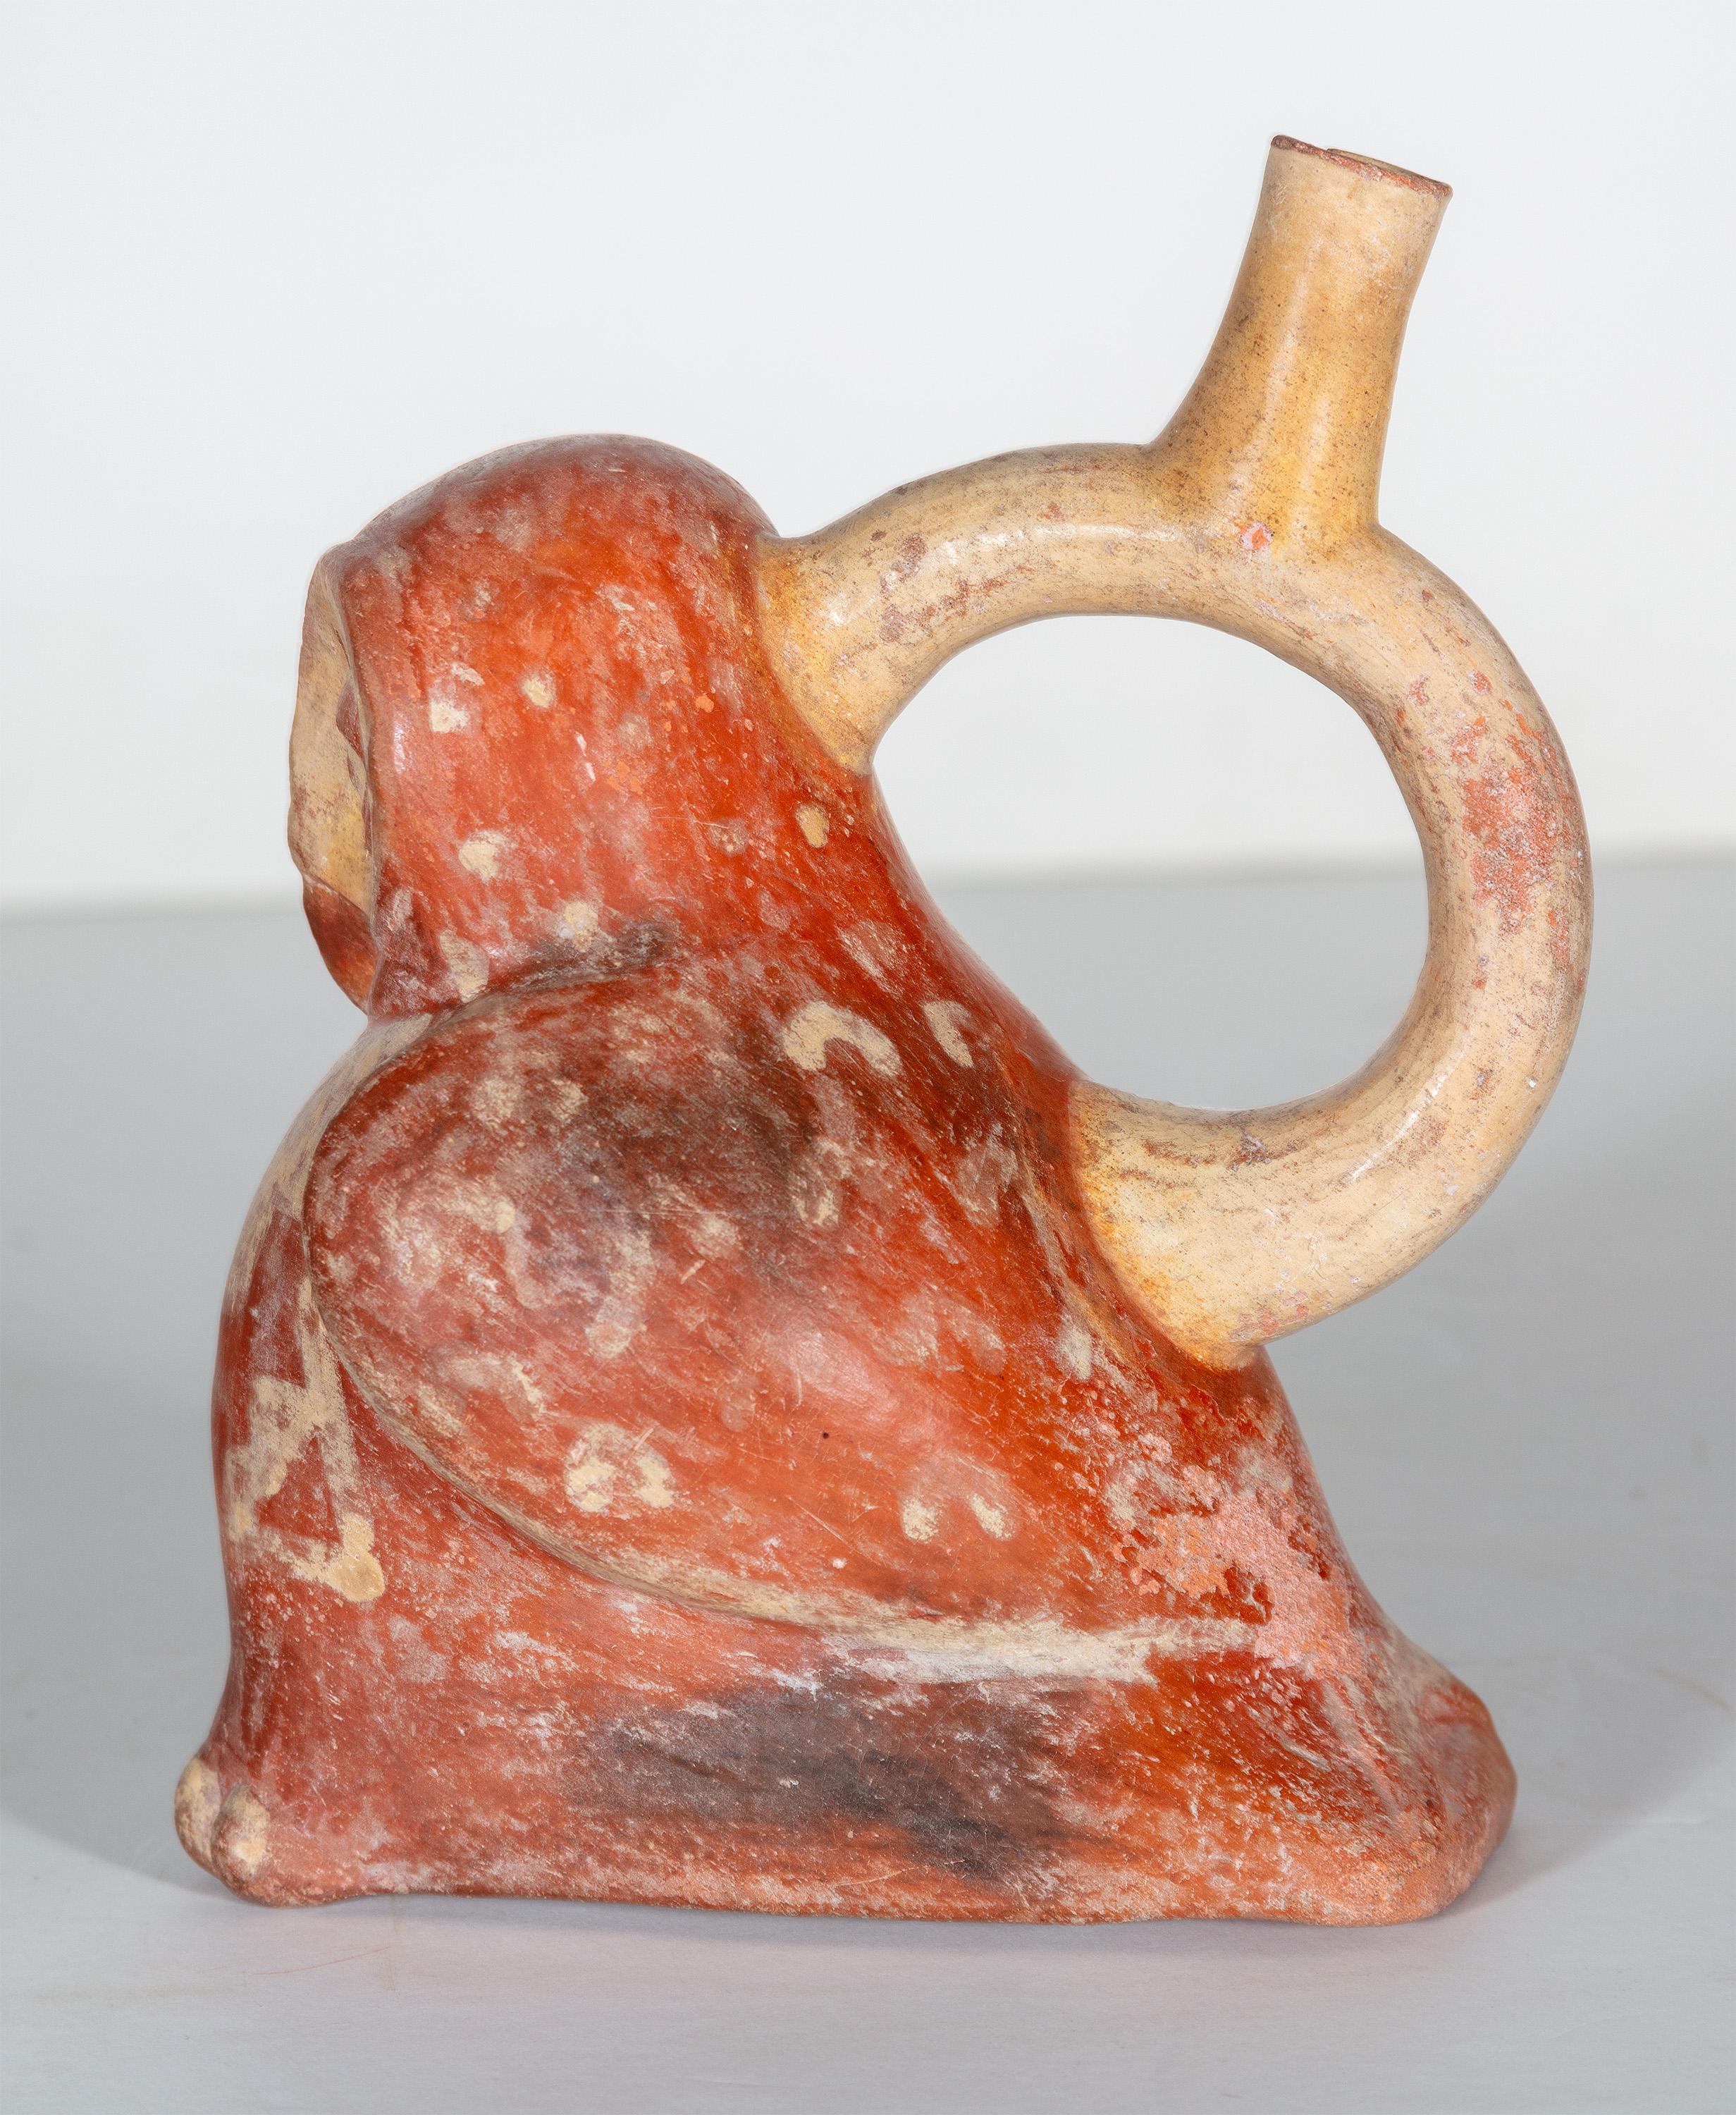 This piece is a pot made by an unknown artist in Pre-Columbian Peru. It takes the shape of an owl and has a circular handle with the opening on its back. This pot is a light beige and red ocher color. 

8